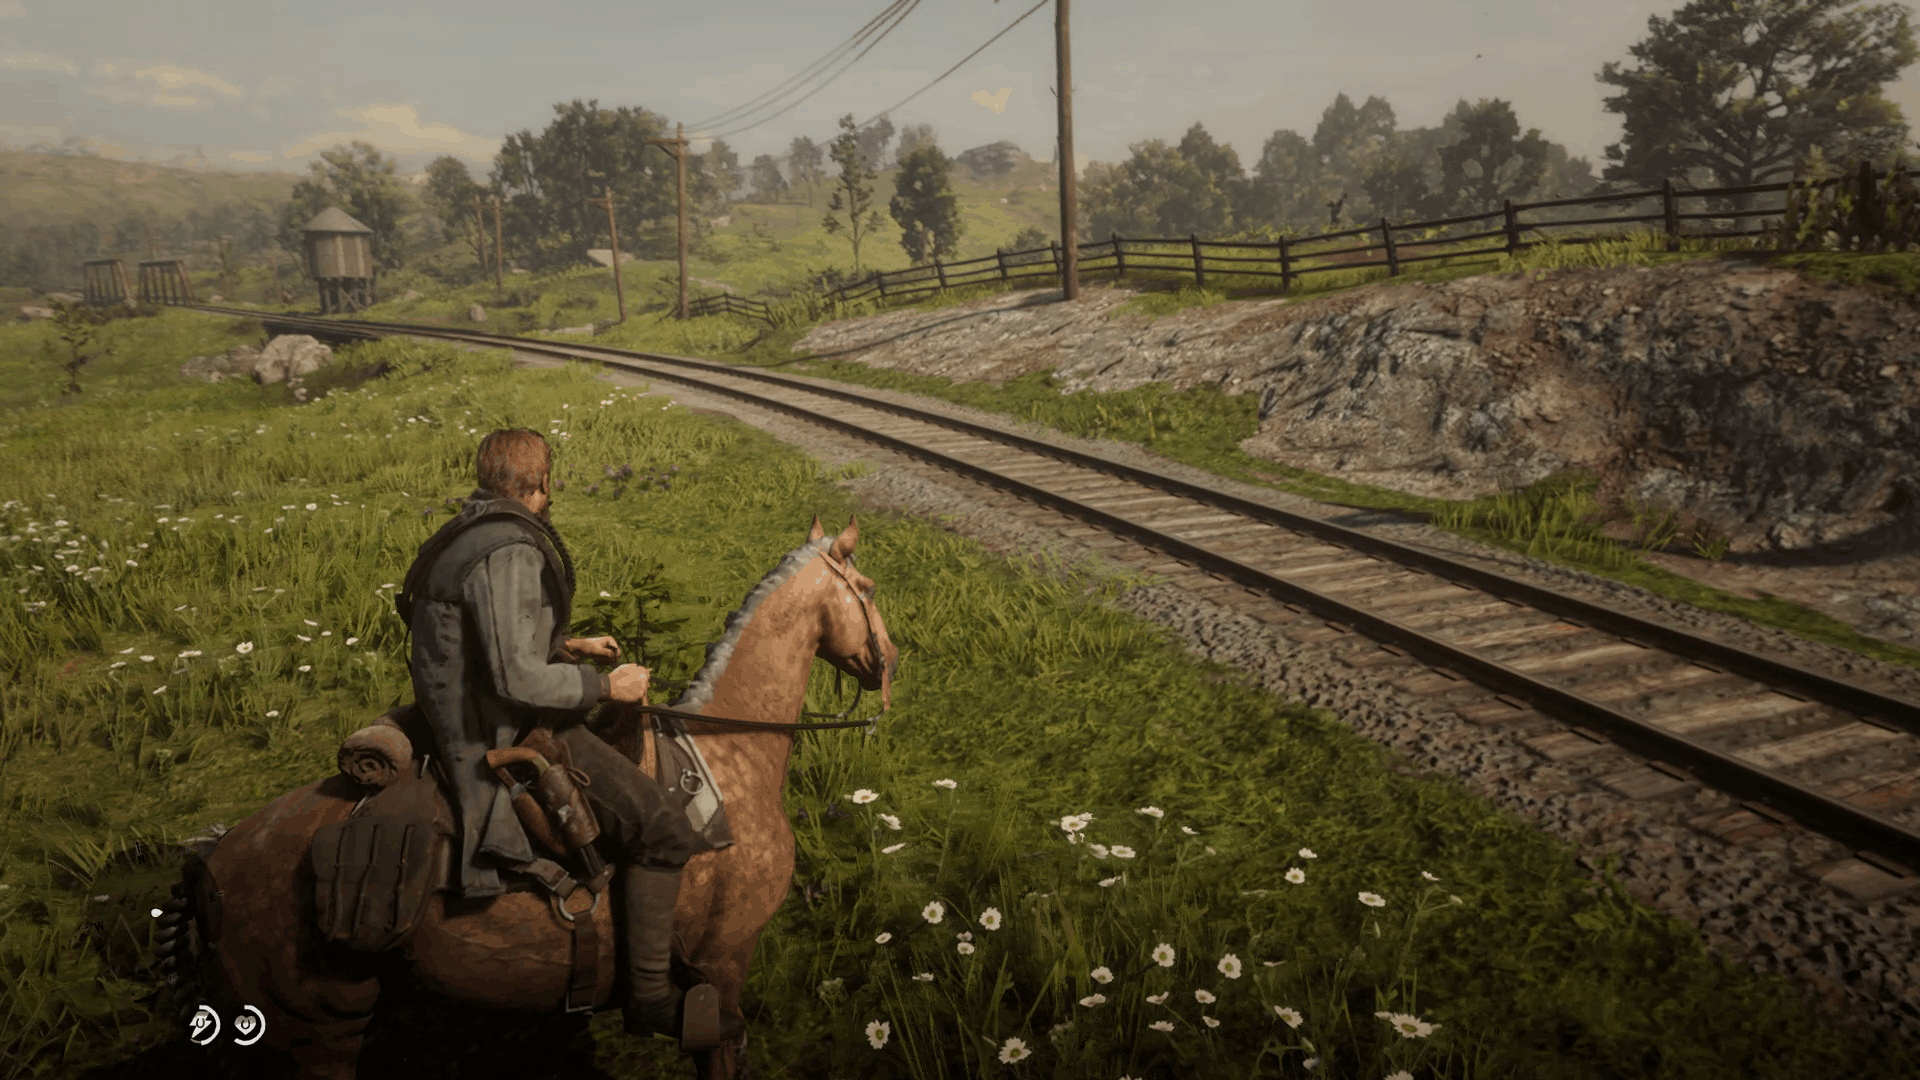 Red dead redemption 2 scripts. Red Dead Redemption 2 Mods. Red Dead Redemption 2 Mods Horse. Rdr2 Farm. Red Dead Redemption Horse Mod.